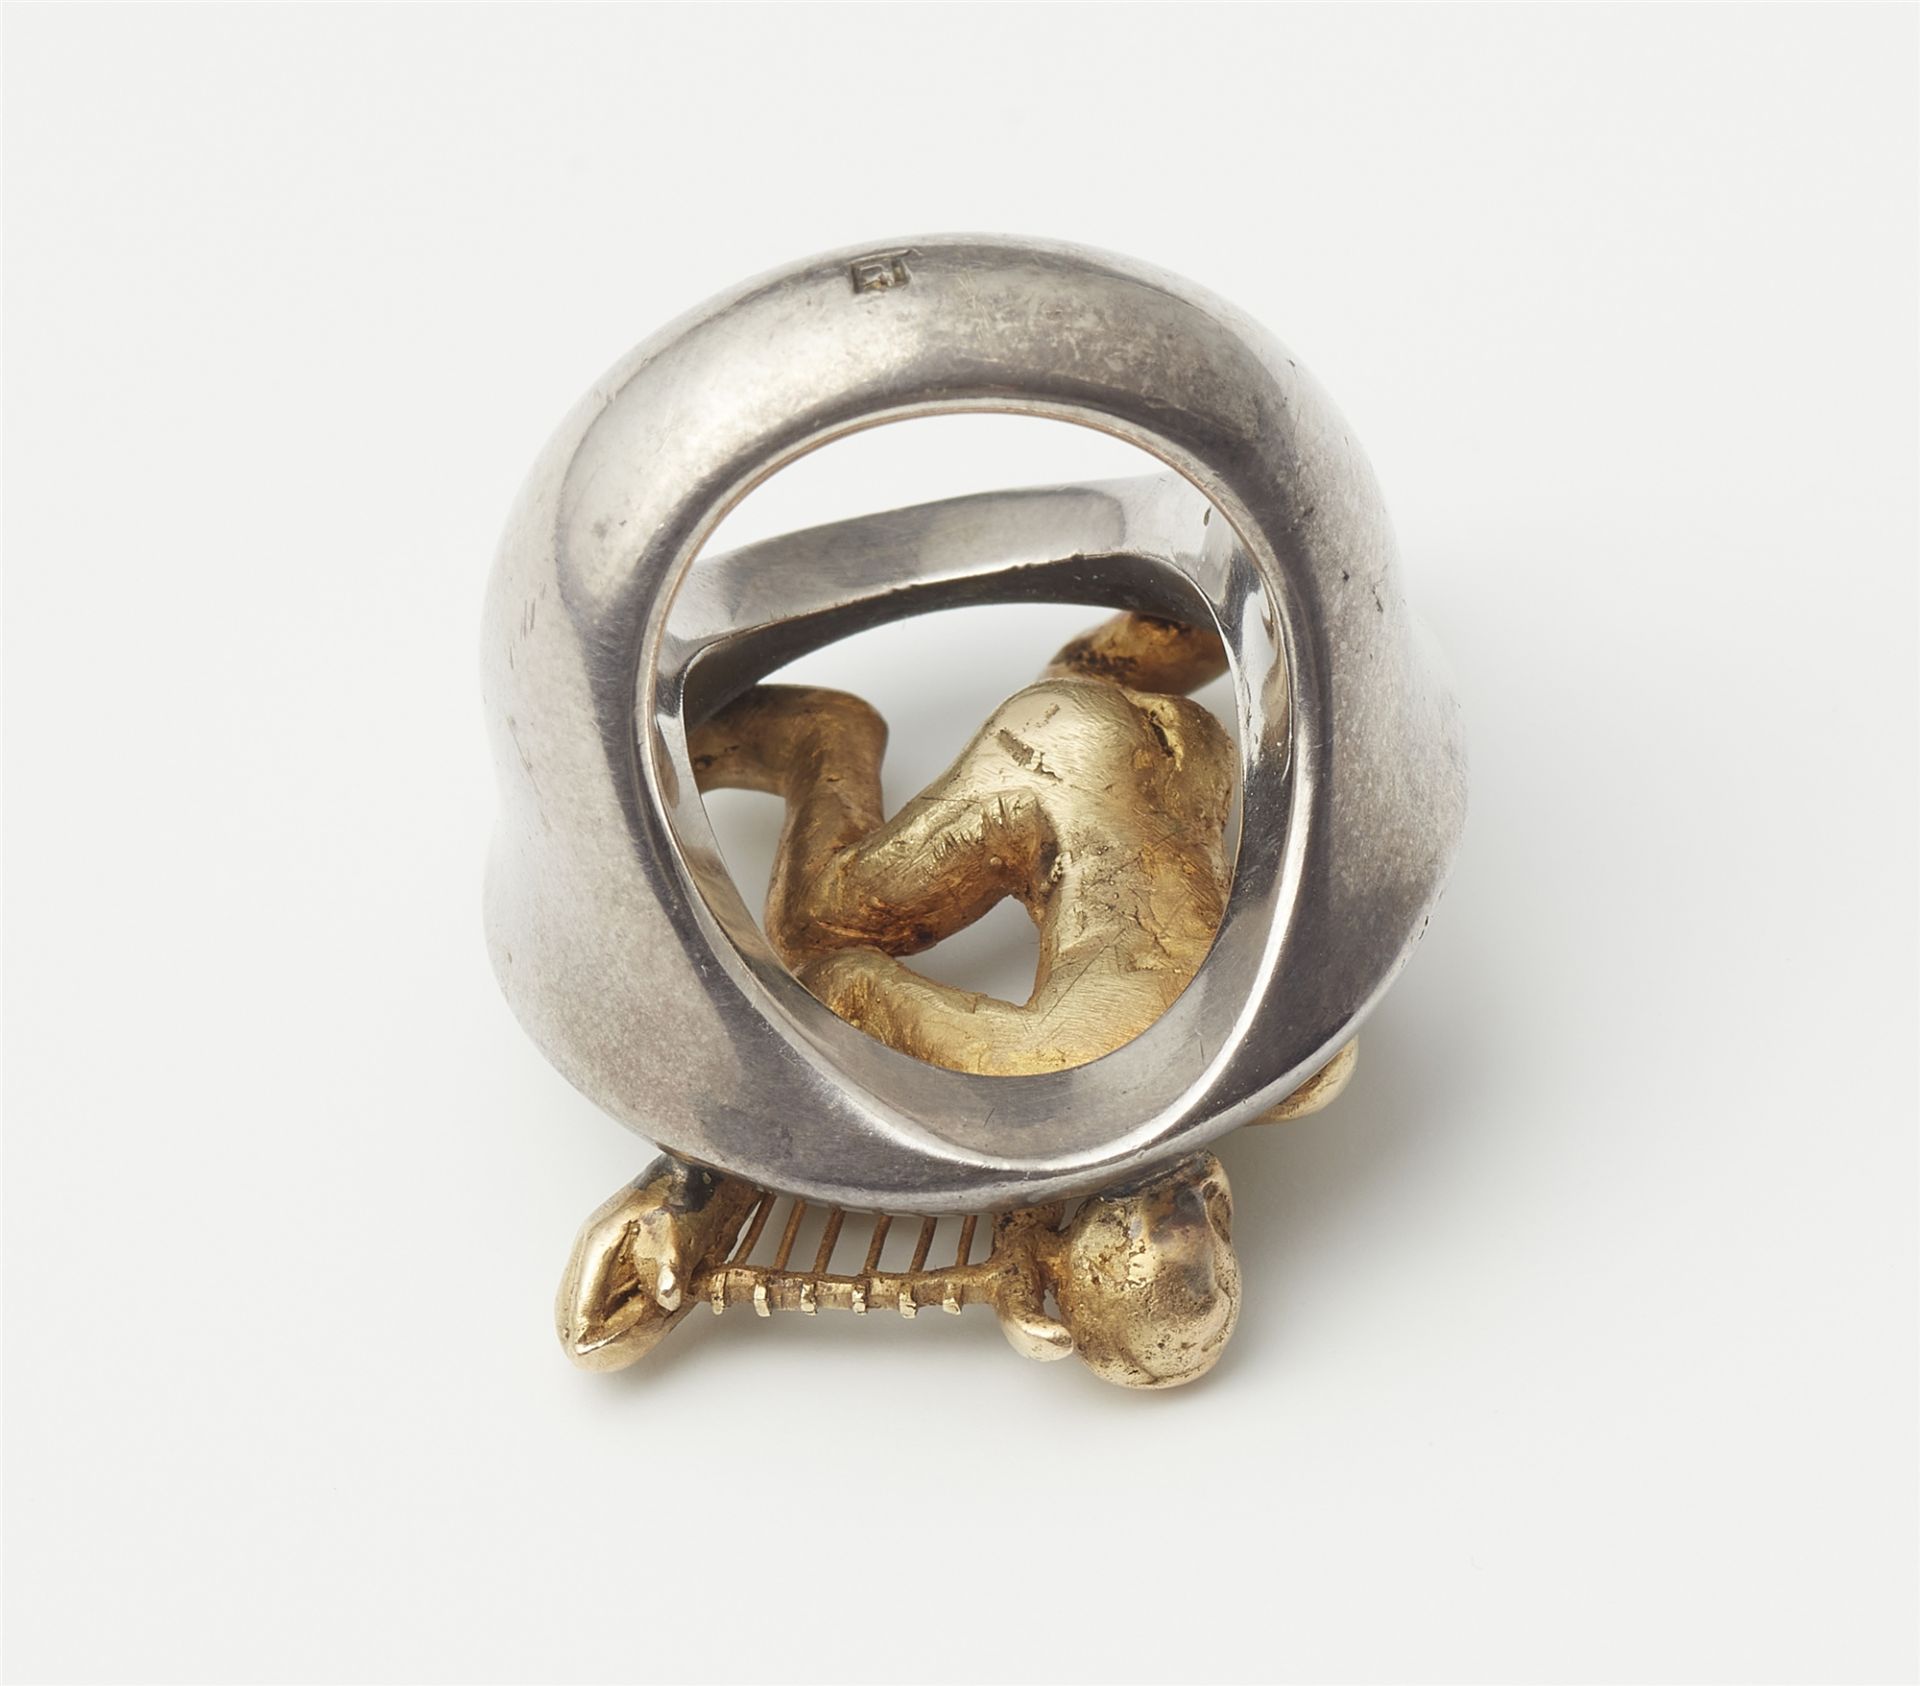 A German silver and 18k gold sculptural "Orpheus" ring. - Image 2 of 2